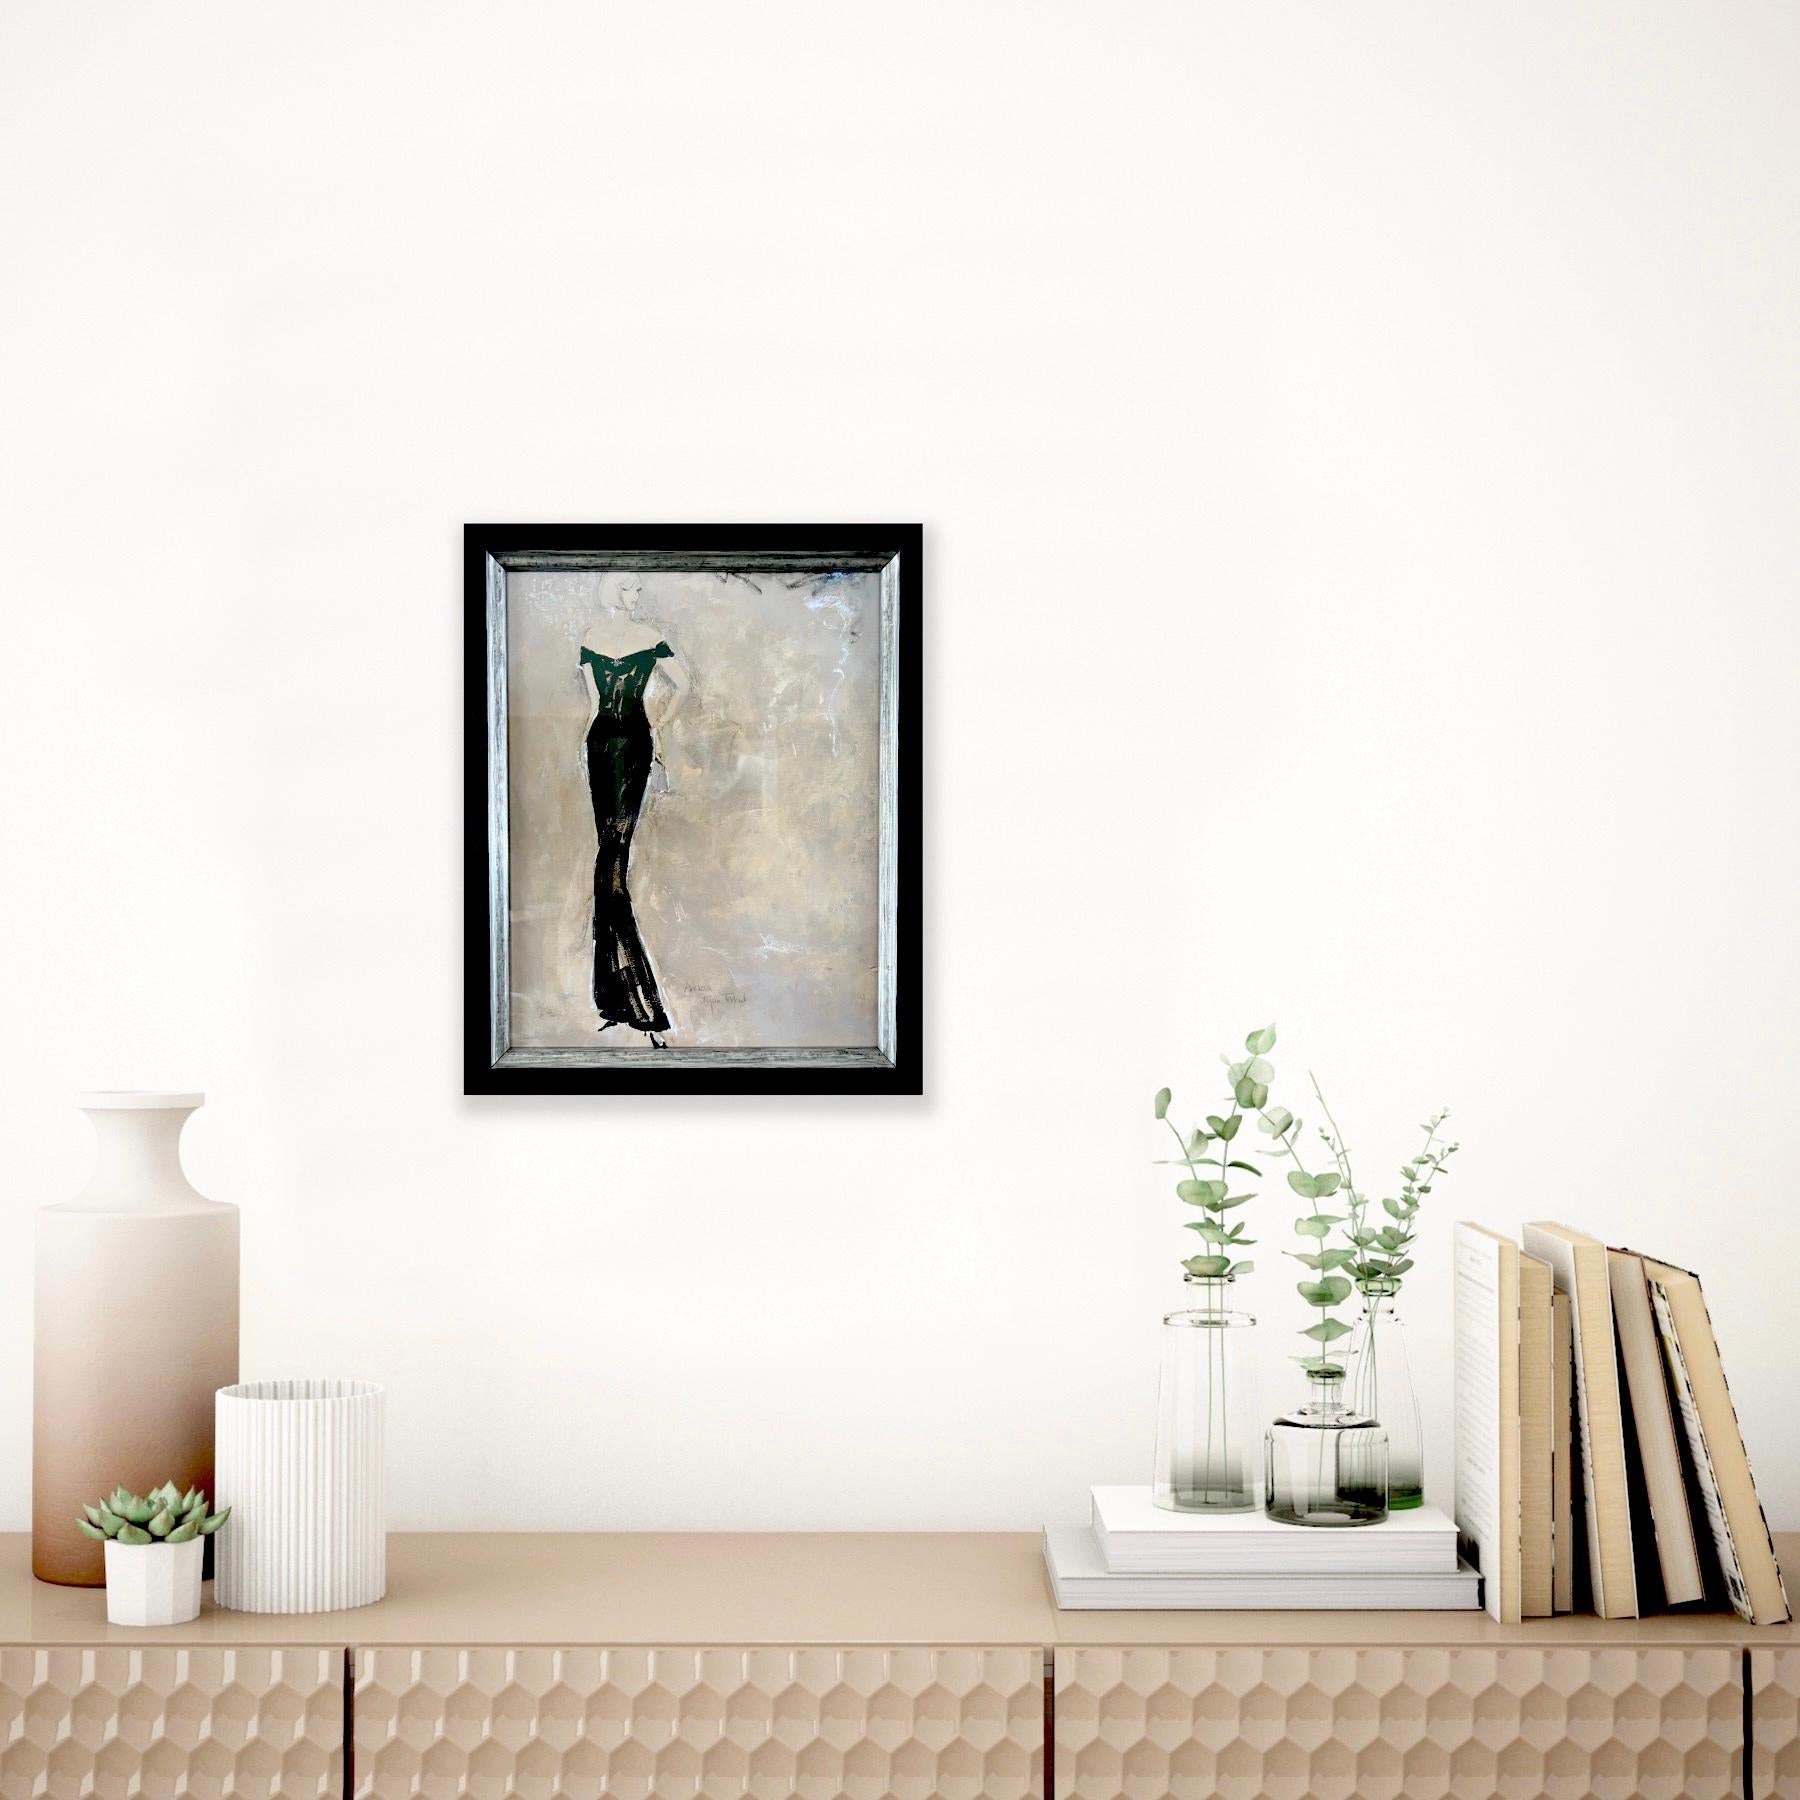 Colors Of The Night  - Framed Art Print - Black, Beige, Fashion Inspired For Sale 1